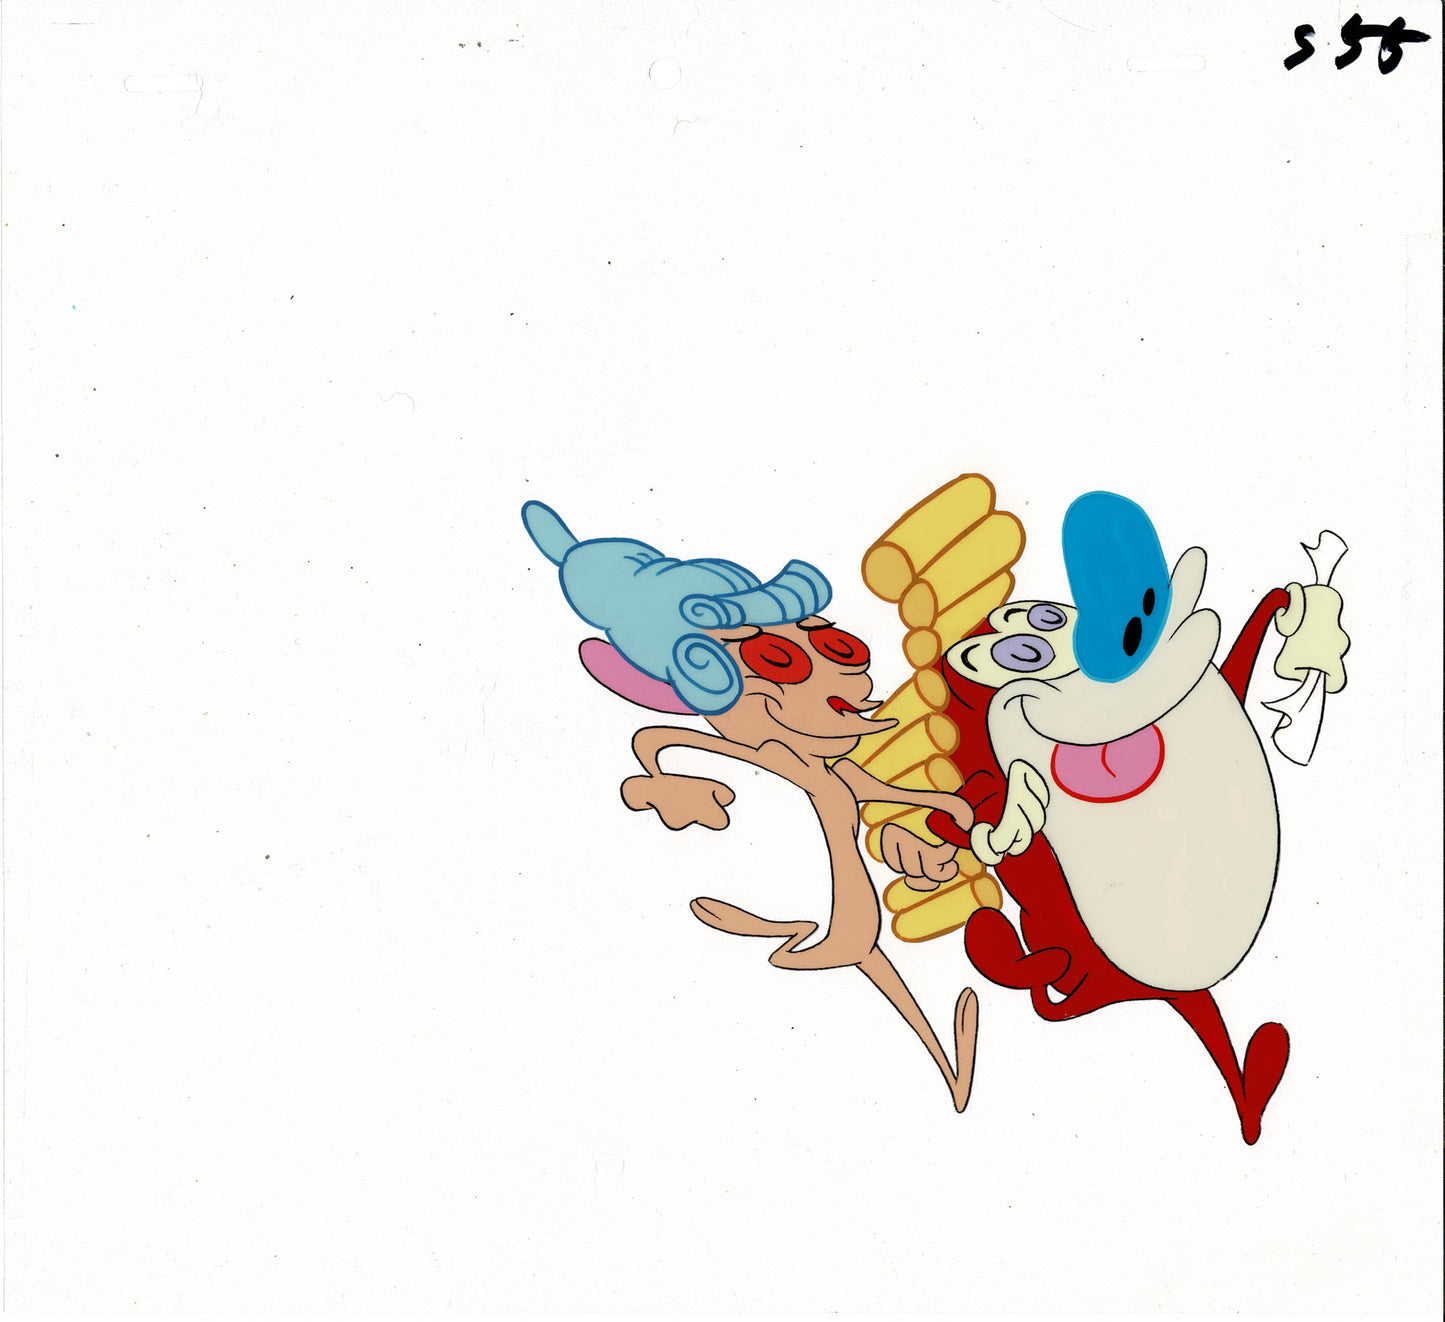 Ren and Stimpy Production Animation Cel from Nickelodeon Episode Travelogue 1995 rsw